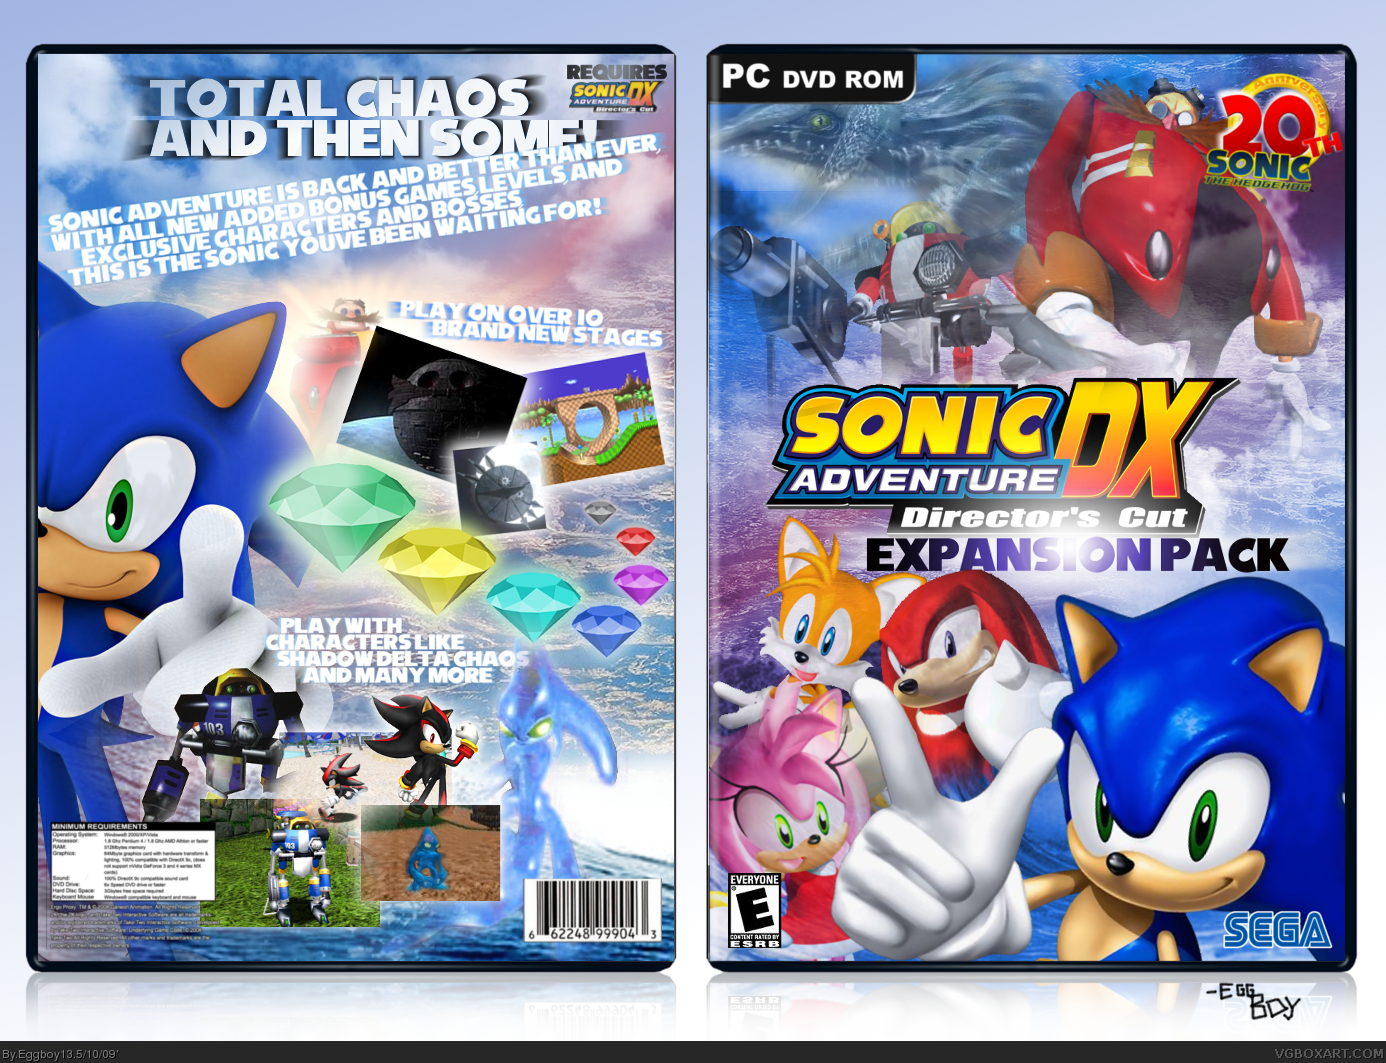 Sonic Adventure DX: Expansion Pack box cover